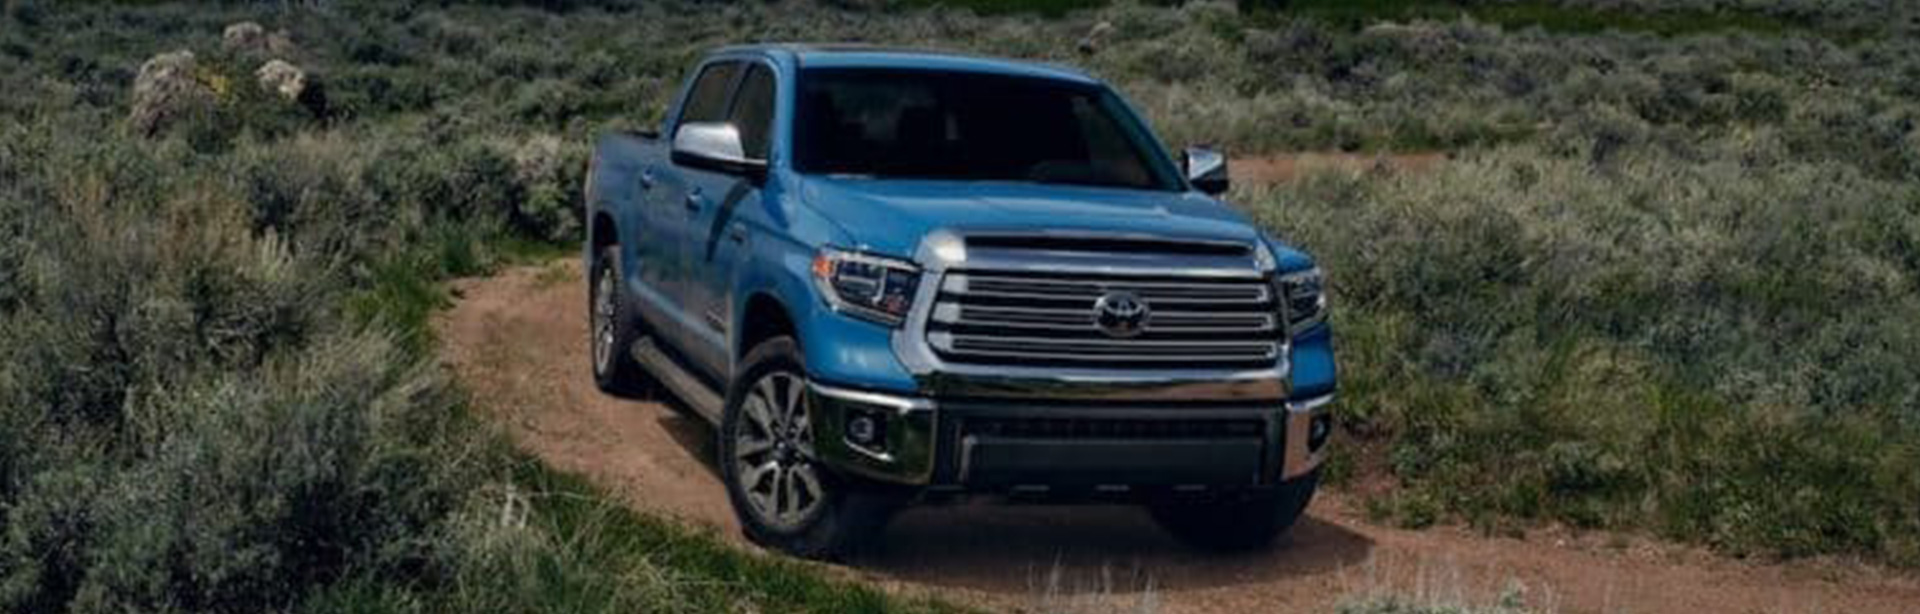 The 2020 Toyota Tundra: Everything You Need to Know | Raleigh, NC